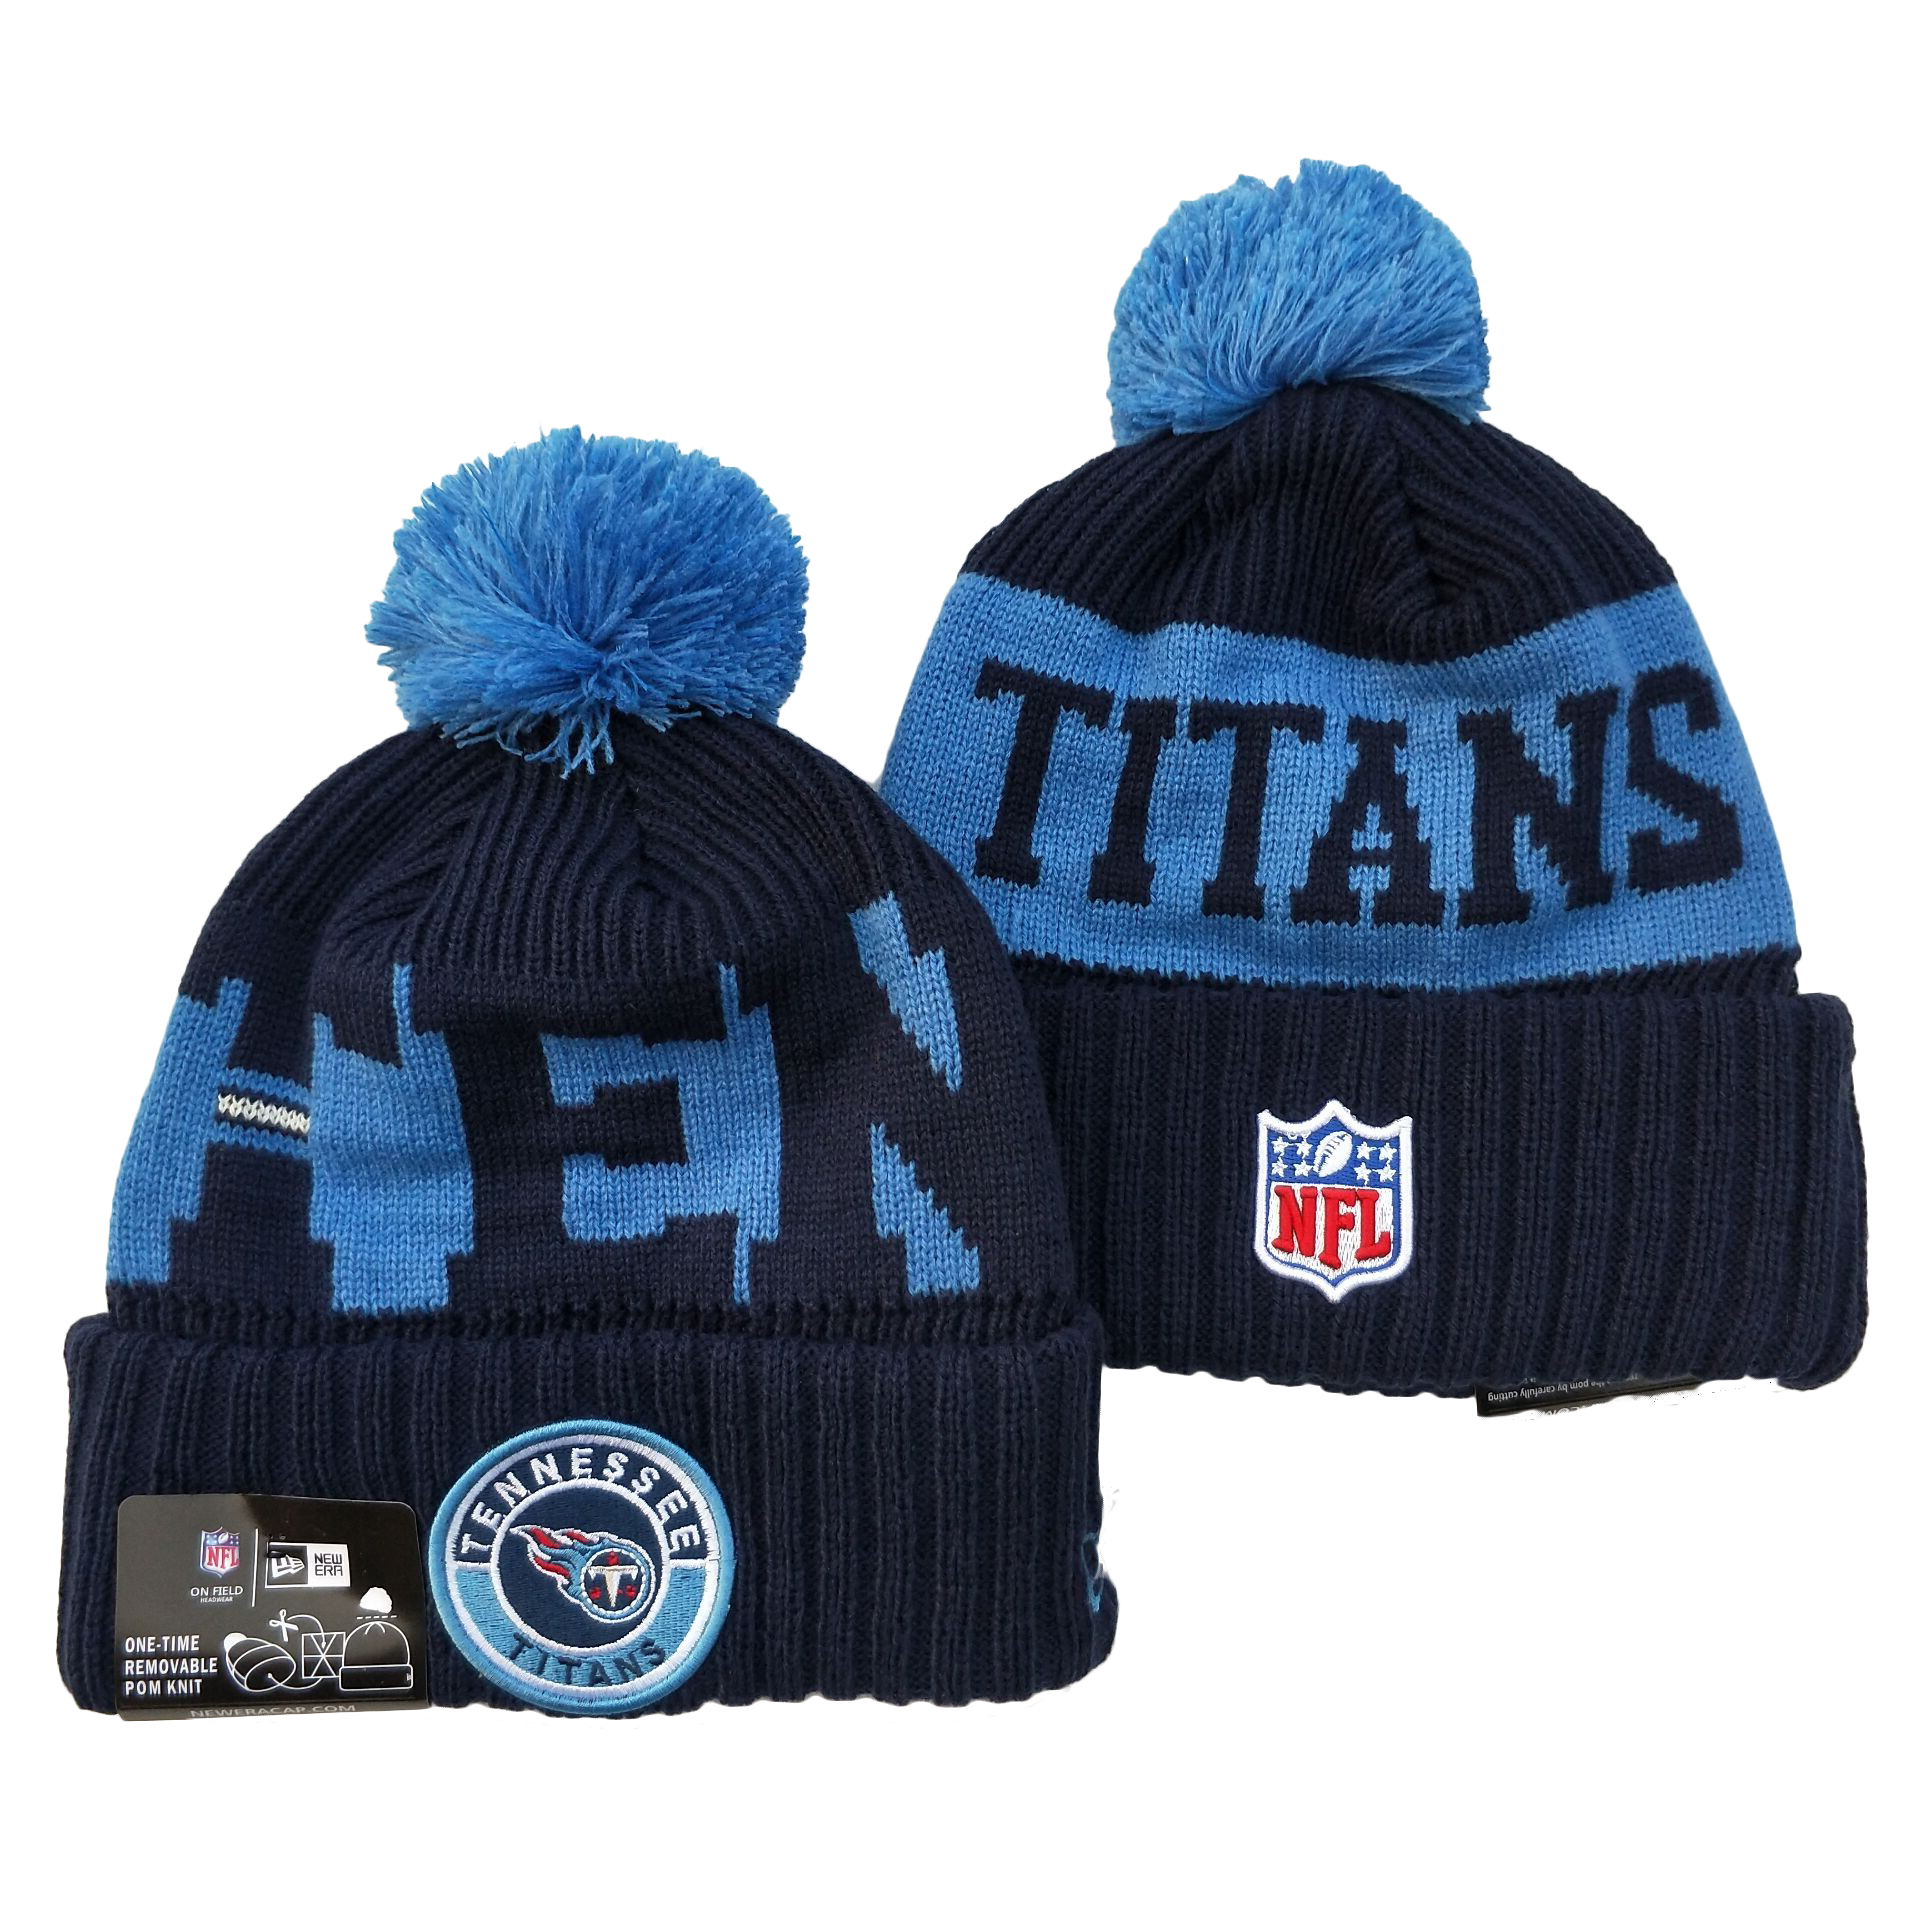 Tennessee Titans Knit Hats -12